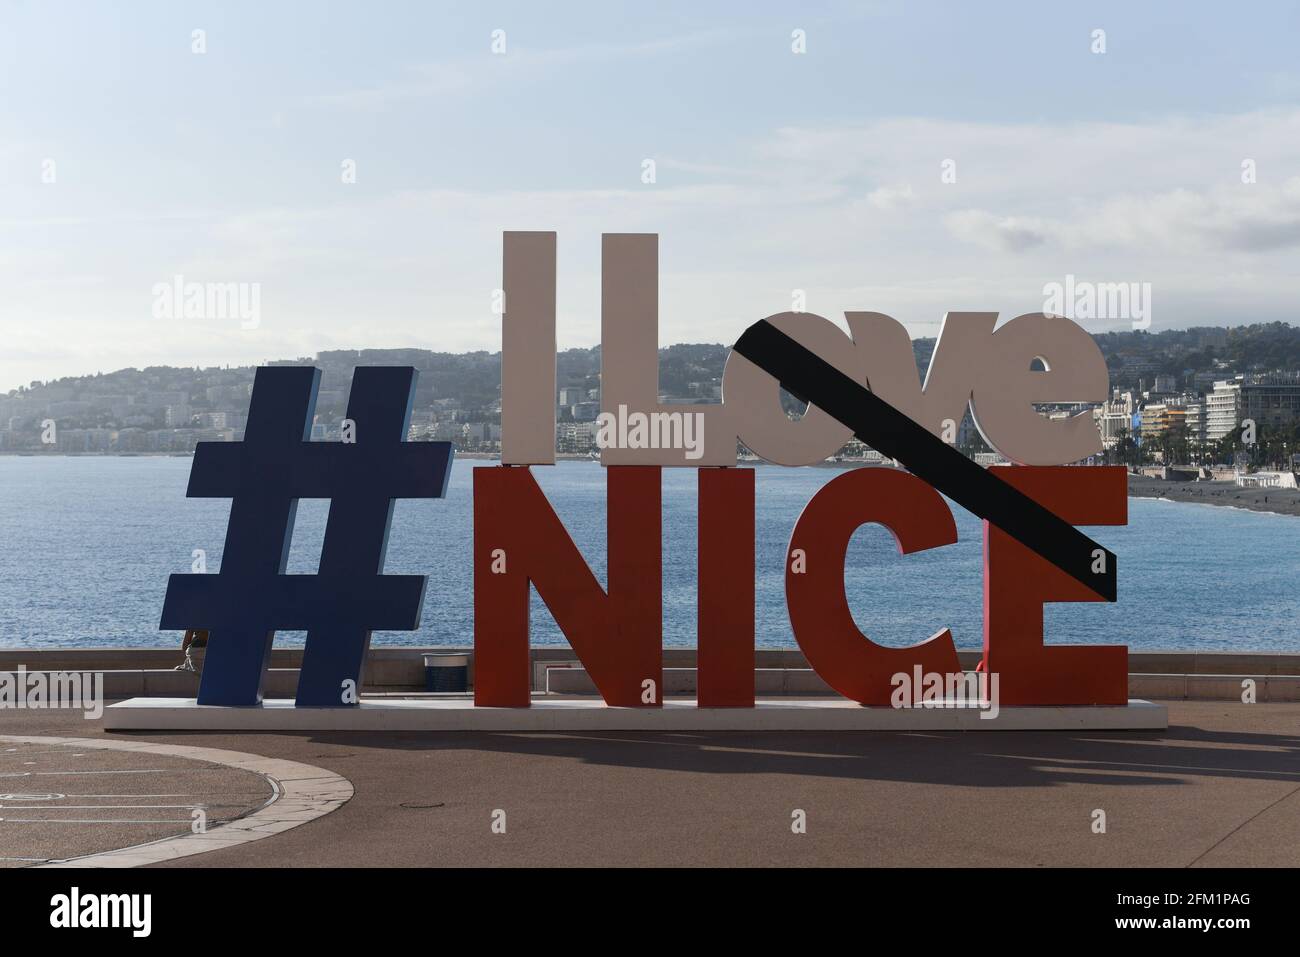 *** STRICTLY NO SALES TO FRENCH MEDIA OR PUBLISHERS - RIGHTS RESERVED ***October 30, 2020 - Nice, France: The logo  #ILoveNice with a black banner in homage to the victims of the islamist attack in Notre-Dame basilica, where an an assailant killed three people in a knife attack. Stock Photo